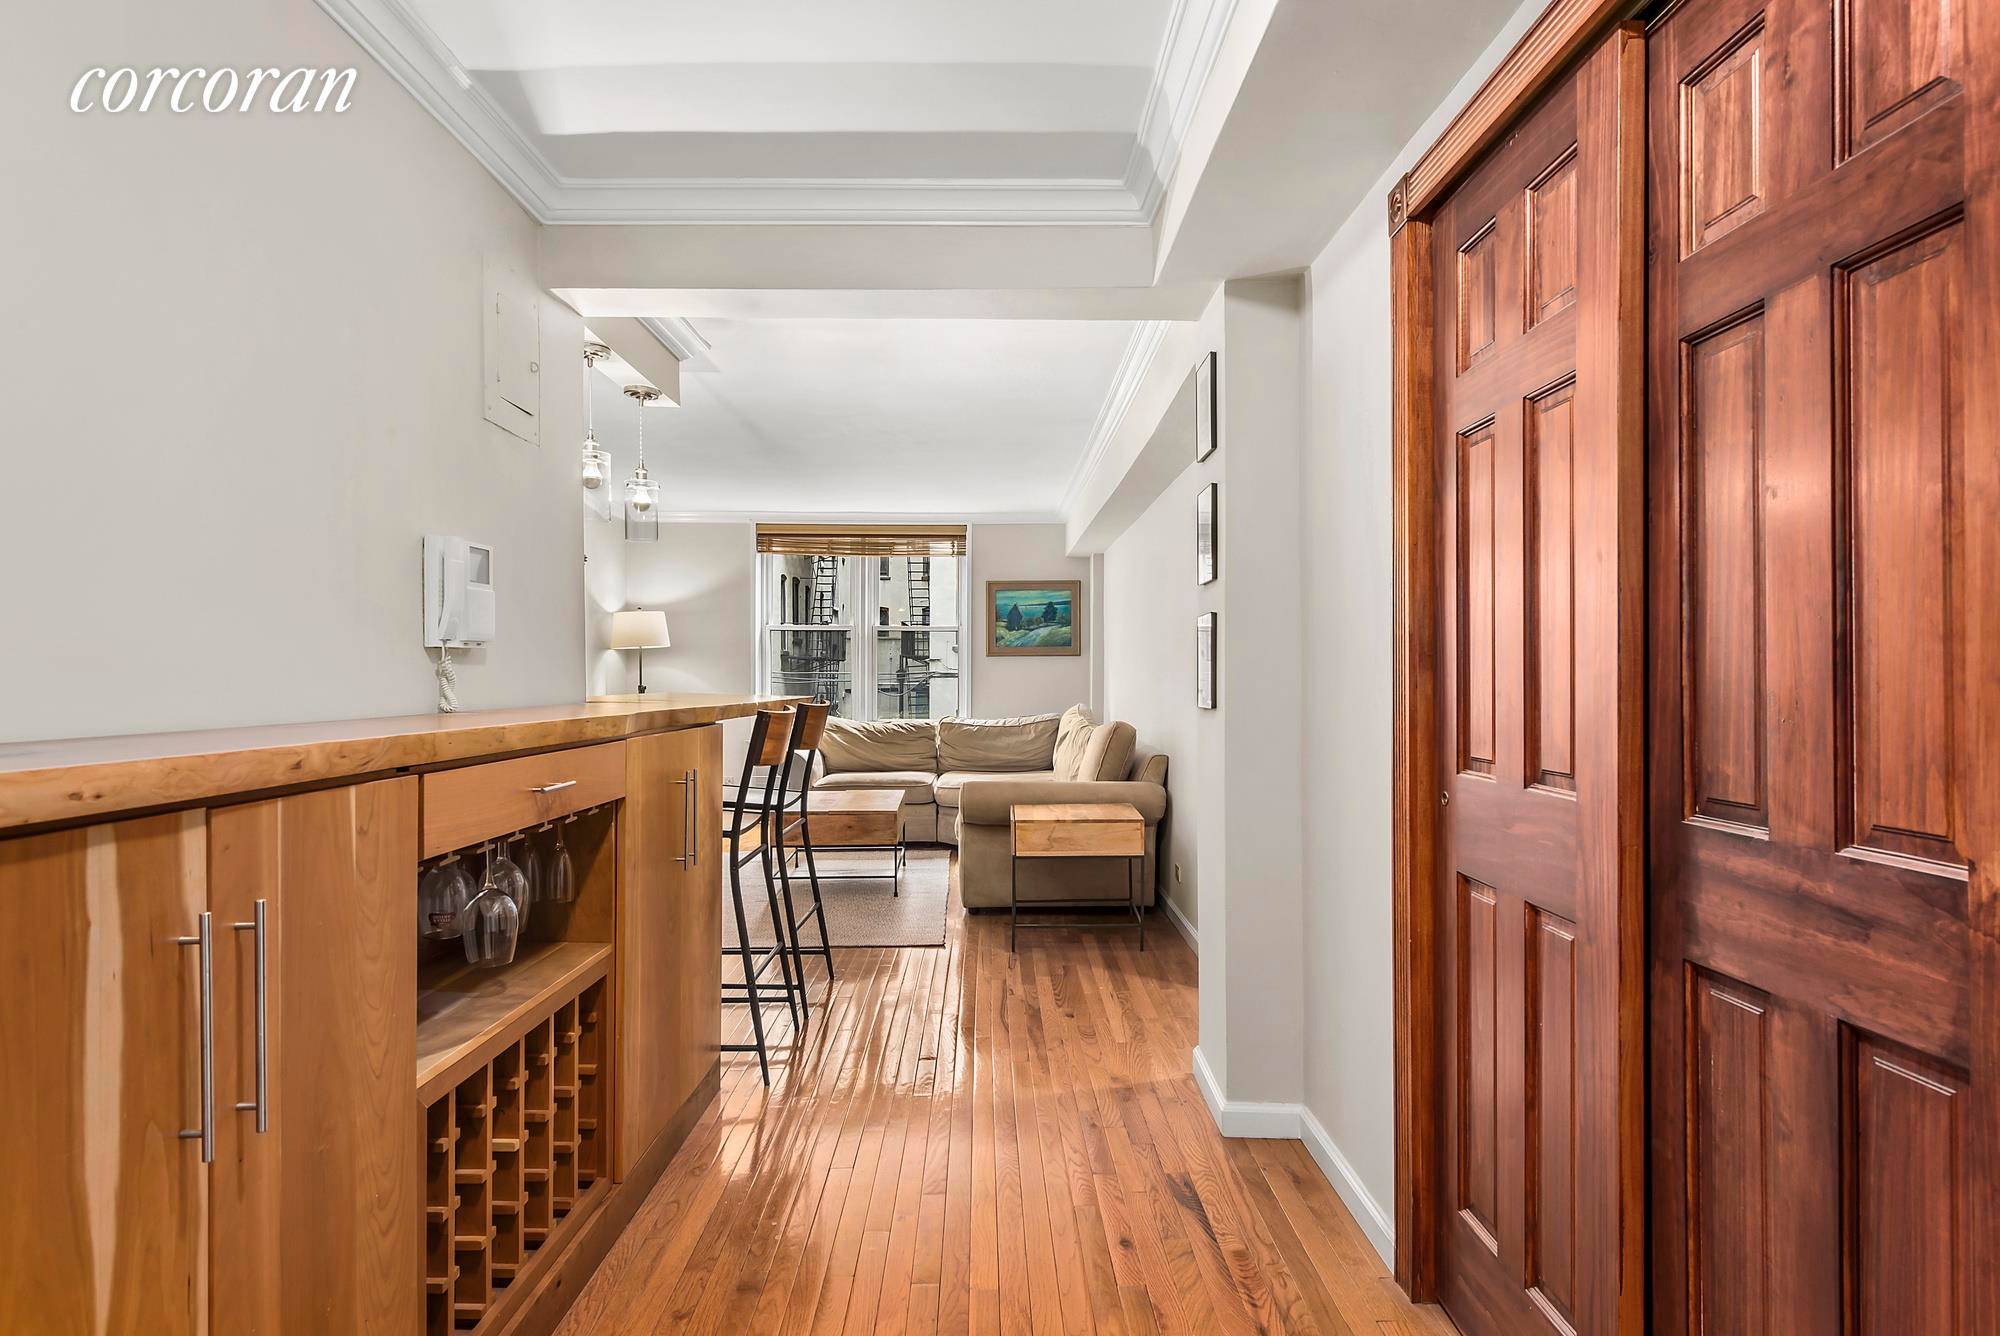 Welcome home to this spacious and pin drop quiet 1 bedroom, ideally located at the cross section of the Kips Bay and Rose Hill neighborhoods.